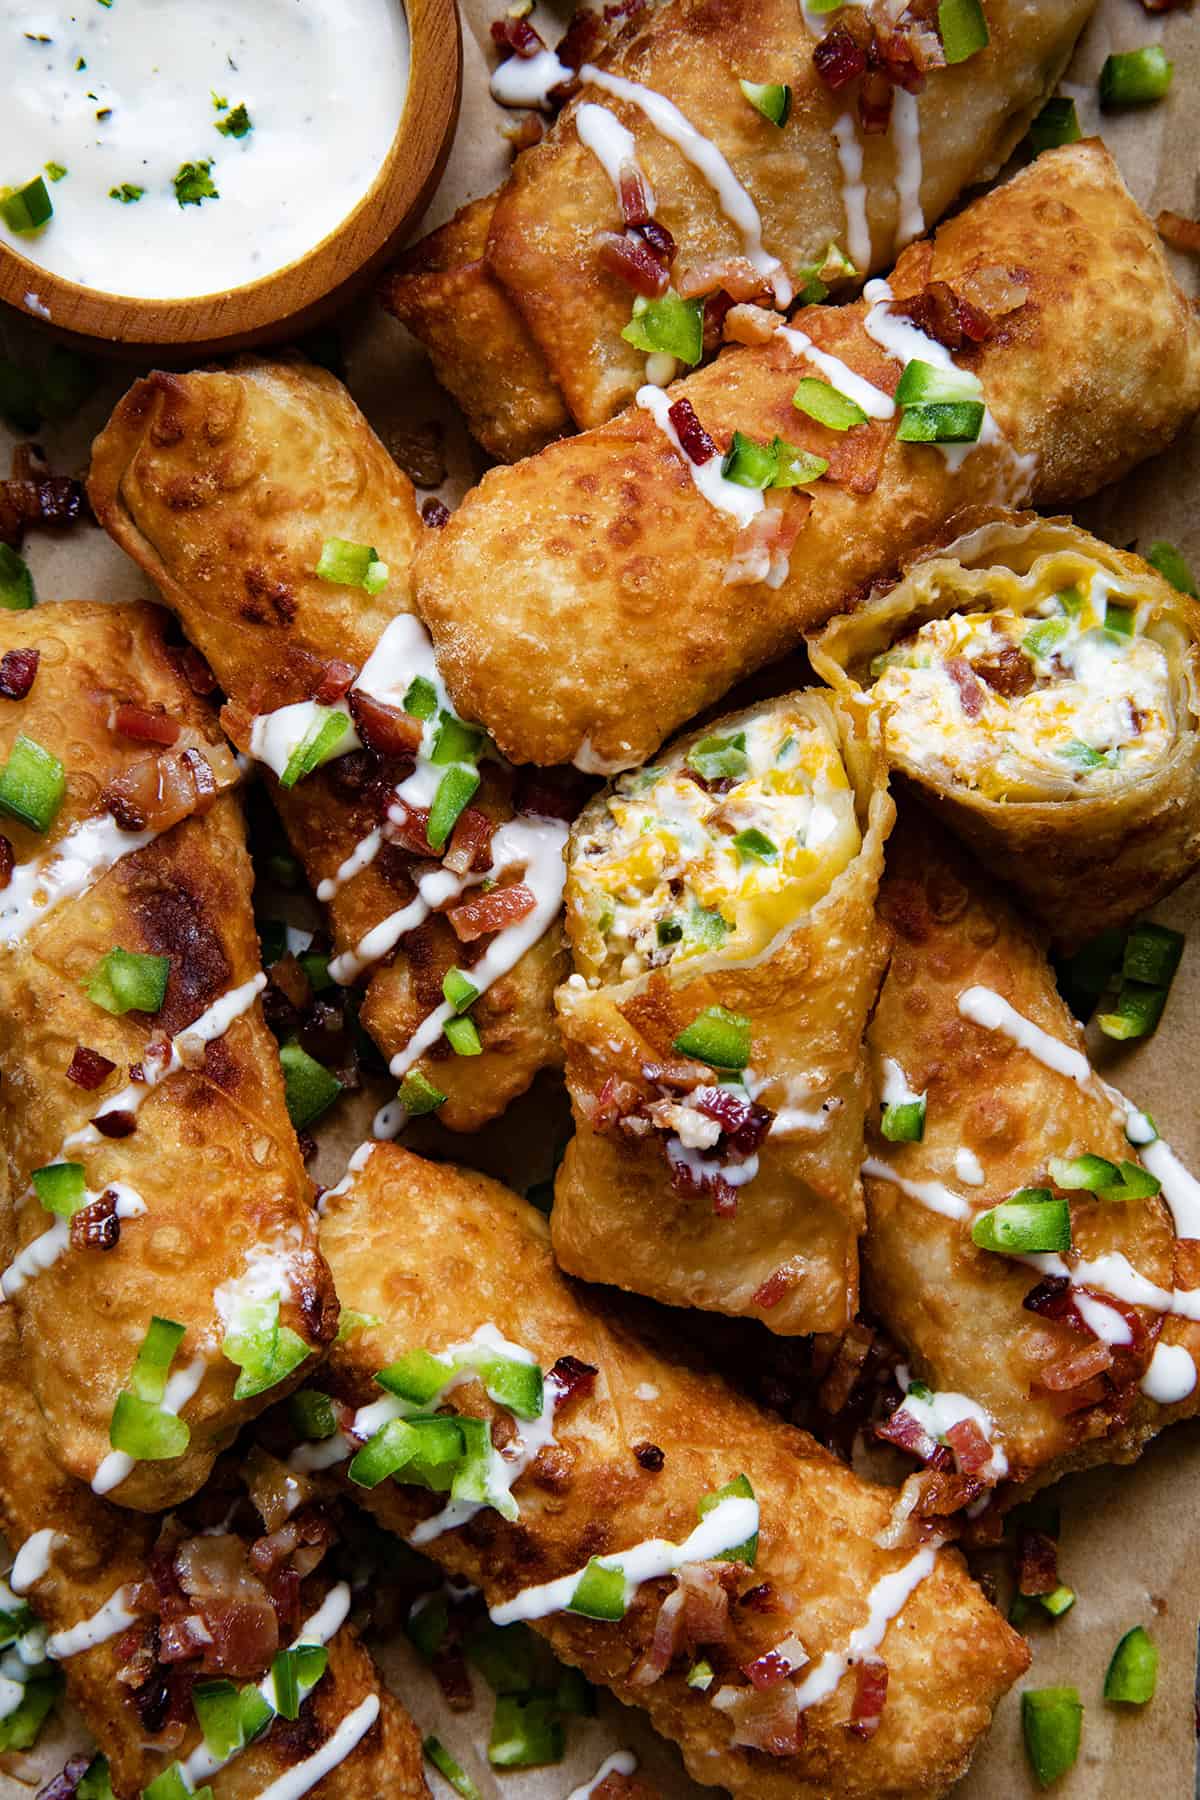 Jalapeno Popper Egg Rolls together and the center egg roll is cut showing the filling inside.